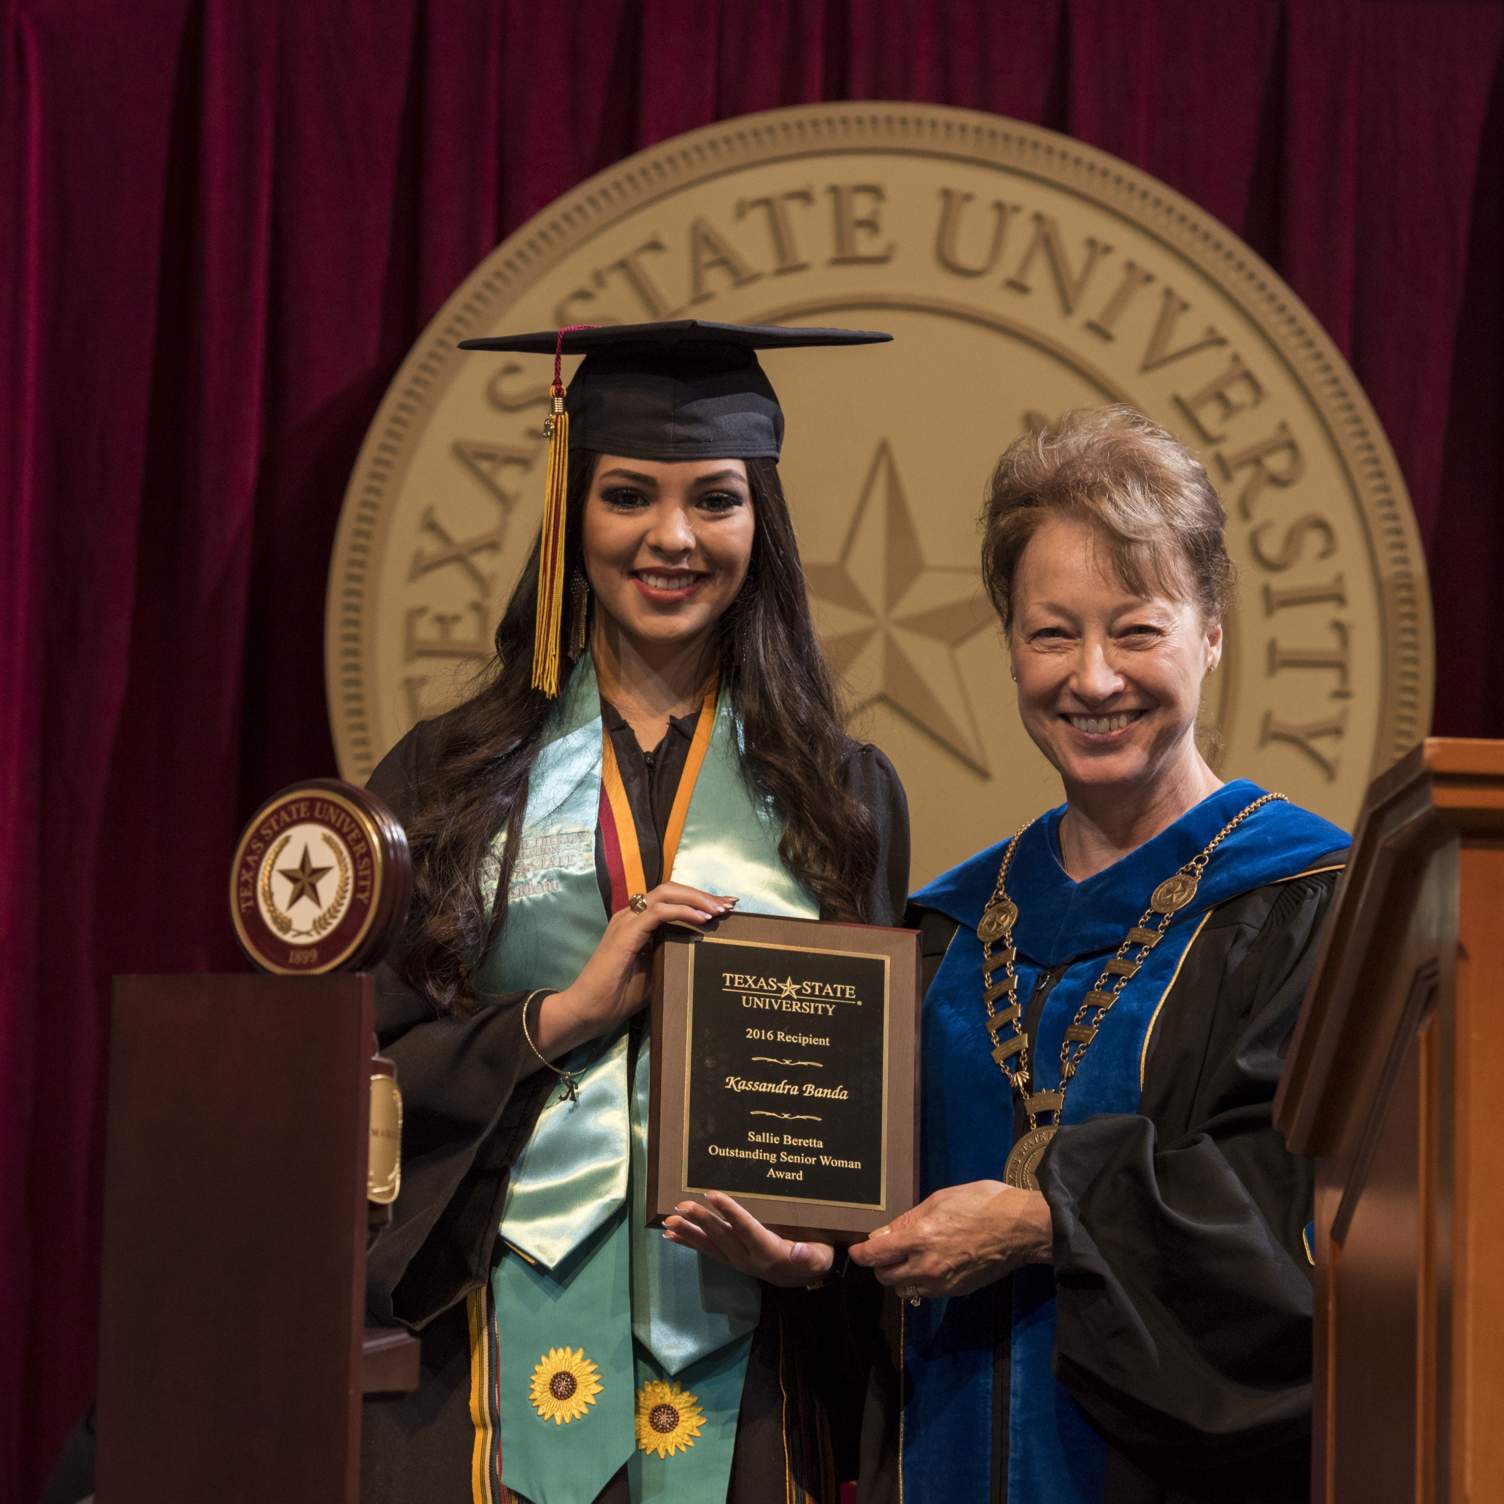 Ms. Kassandra Banda receives the Sallie Beretta Outstanding Senior Woman Award from President Trauth at a Spring 2016 Texas State University commencement ceremony.